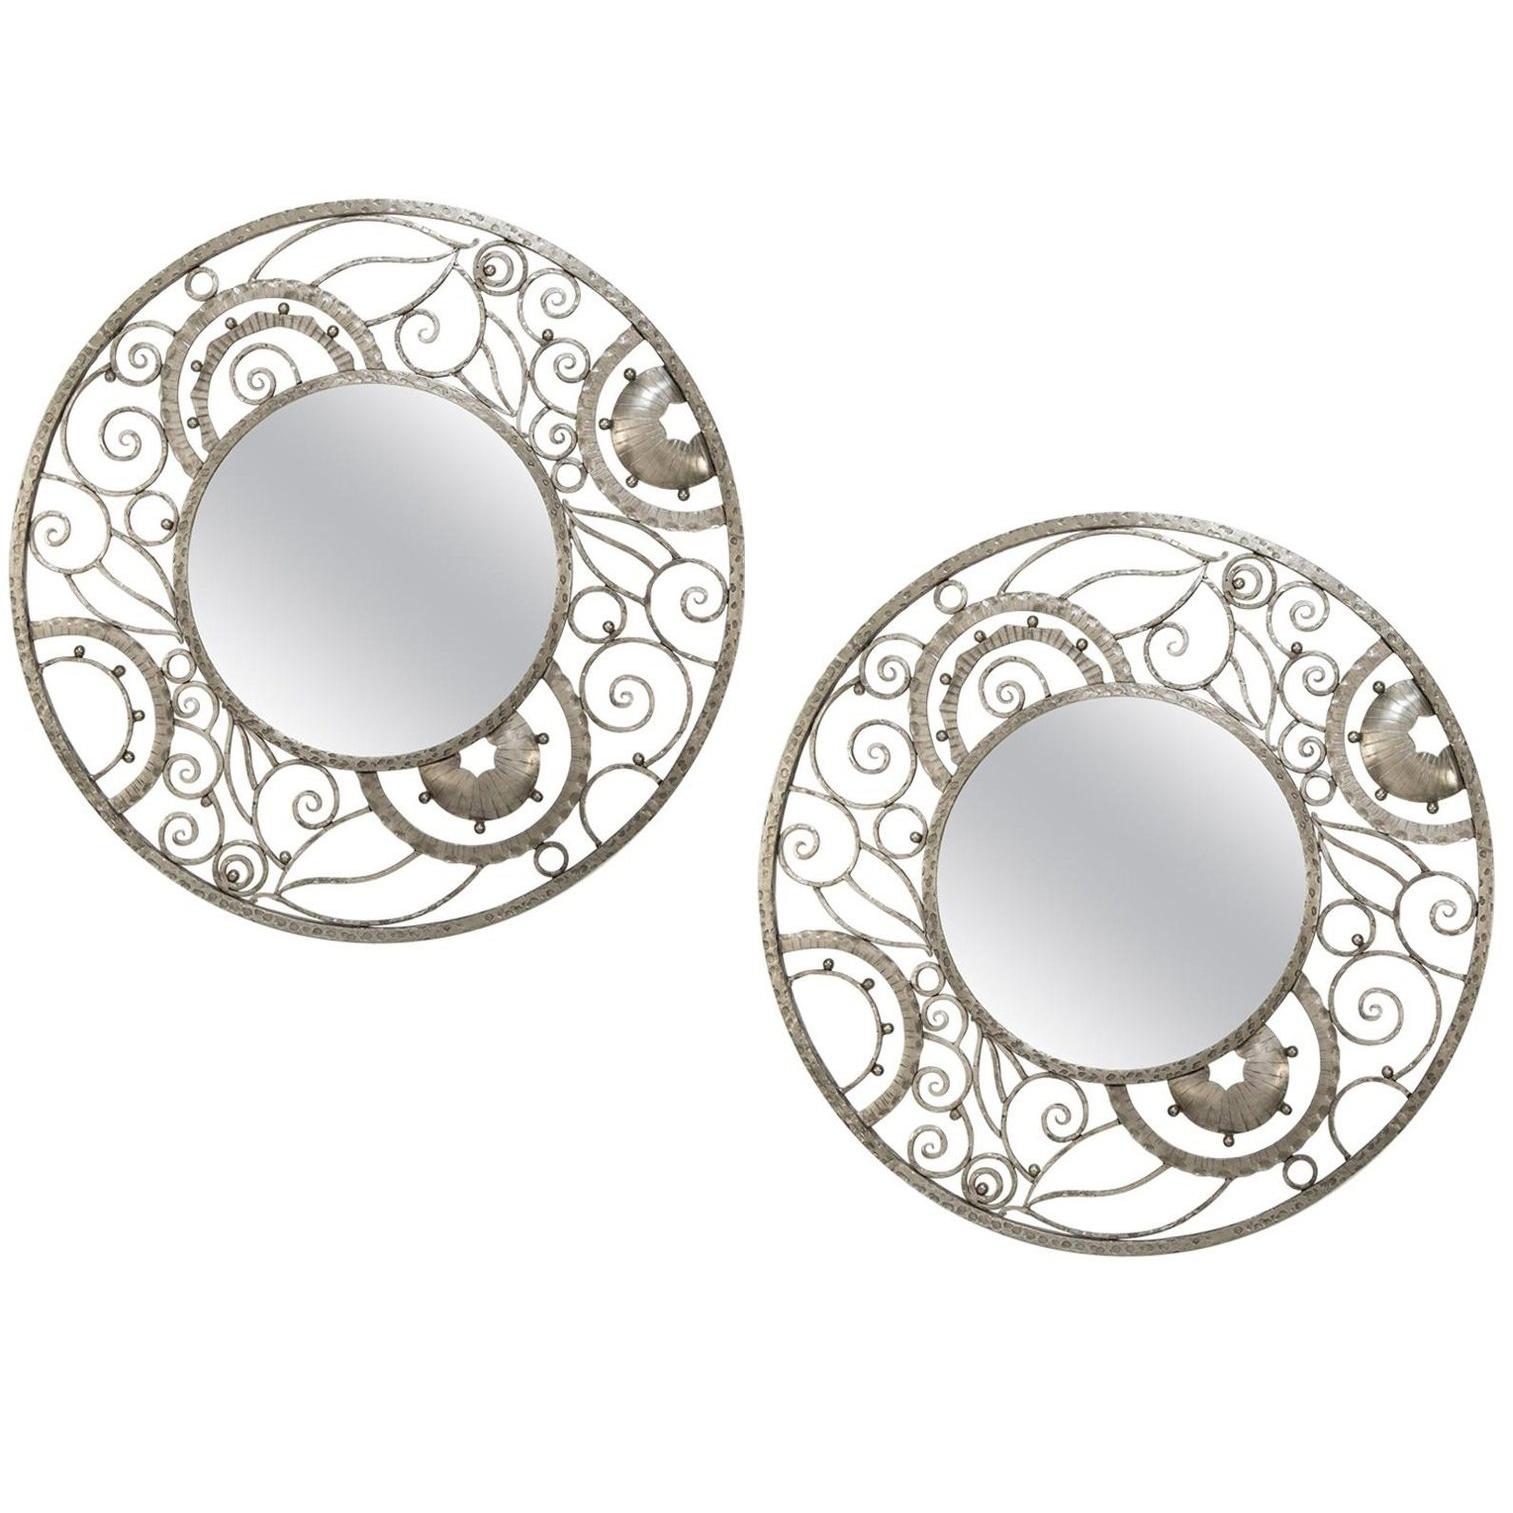 Pair of French Deco Silvered Mirrors